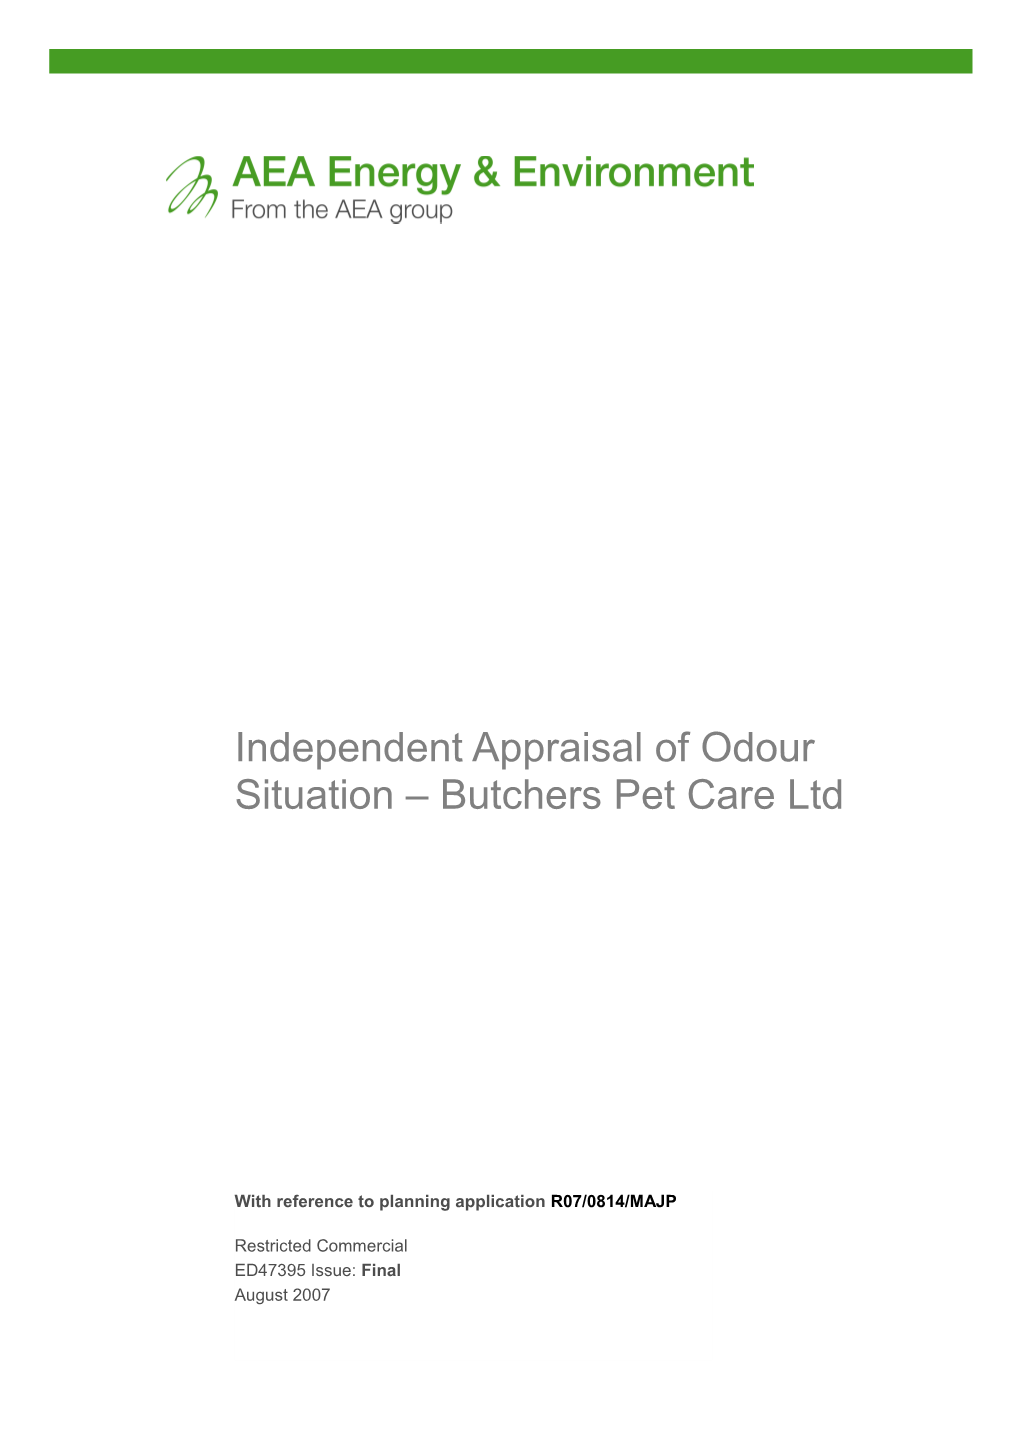 Independent Appraisal of Odour Situation Butchers Pet Care Ltd